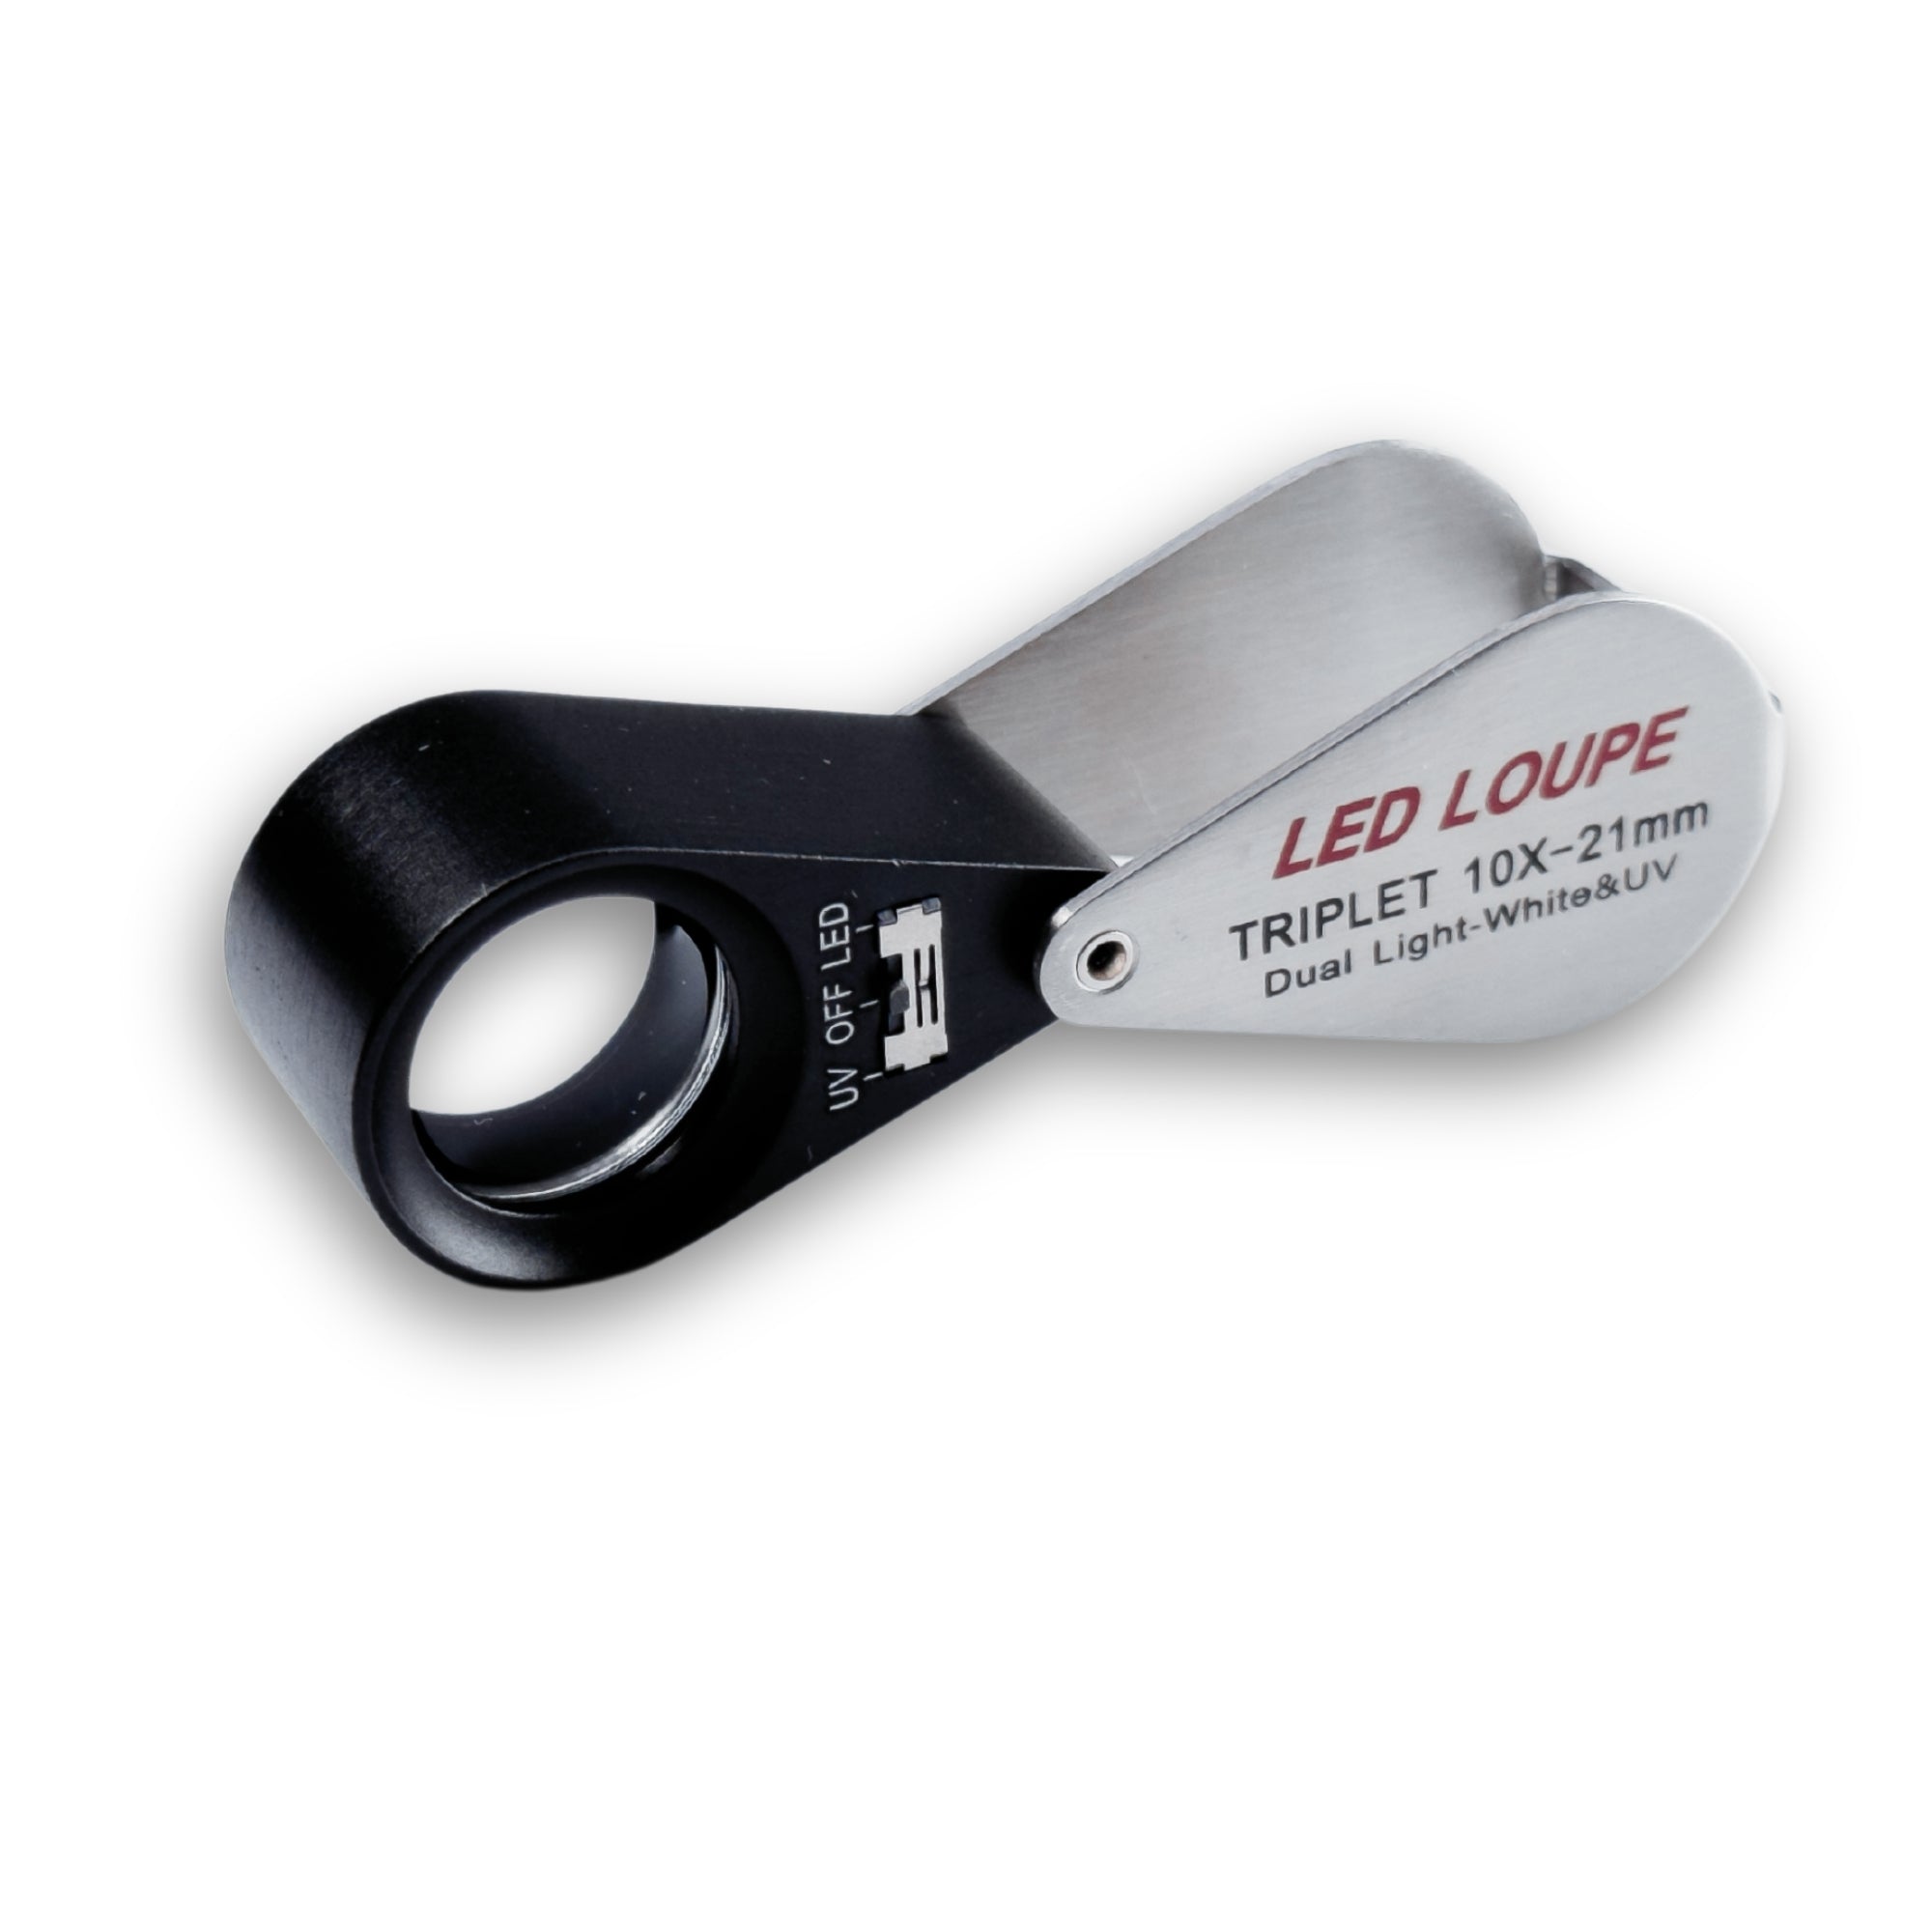 Gemological Loupe 10x 21mm with LED and UV light on batteries